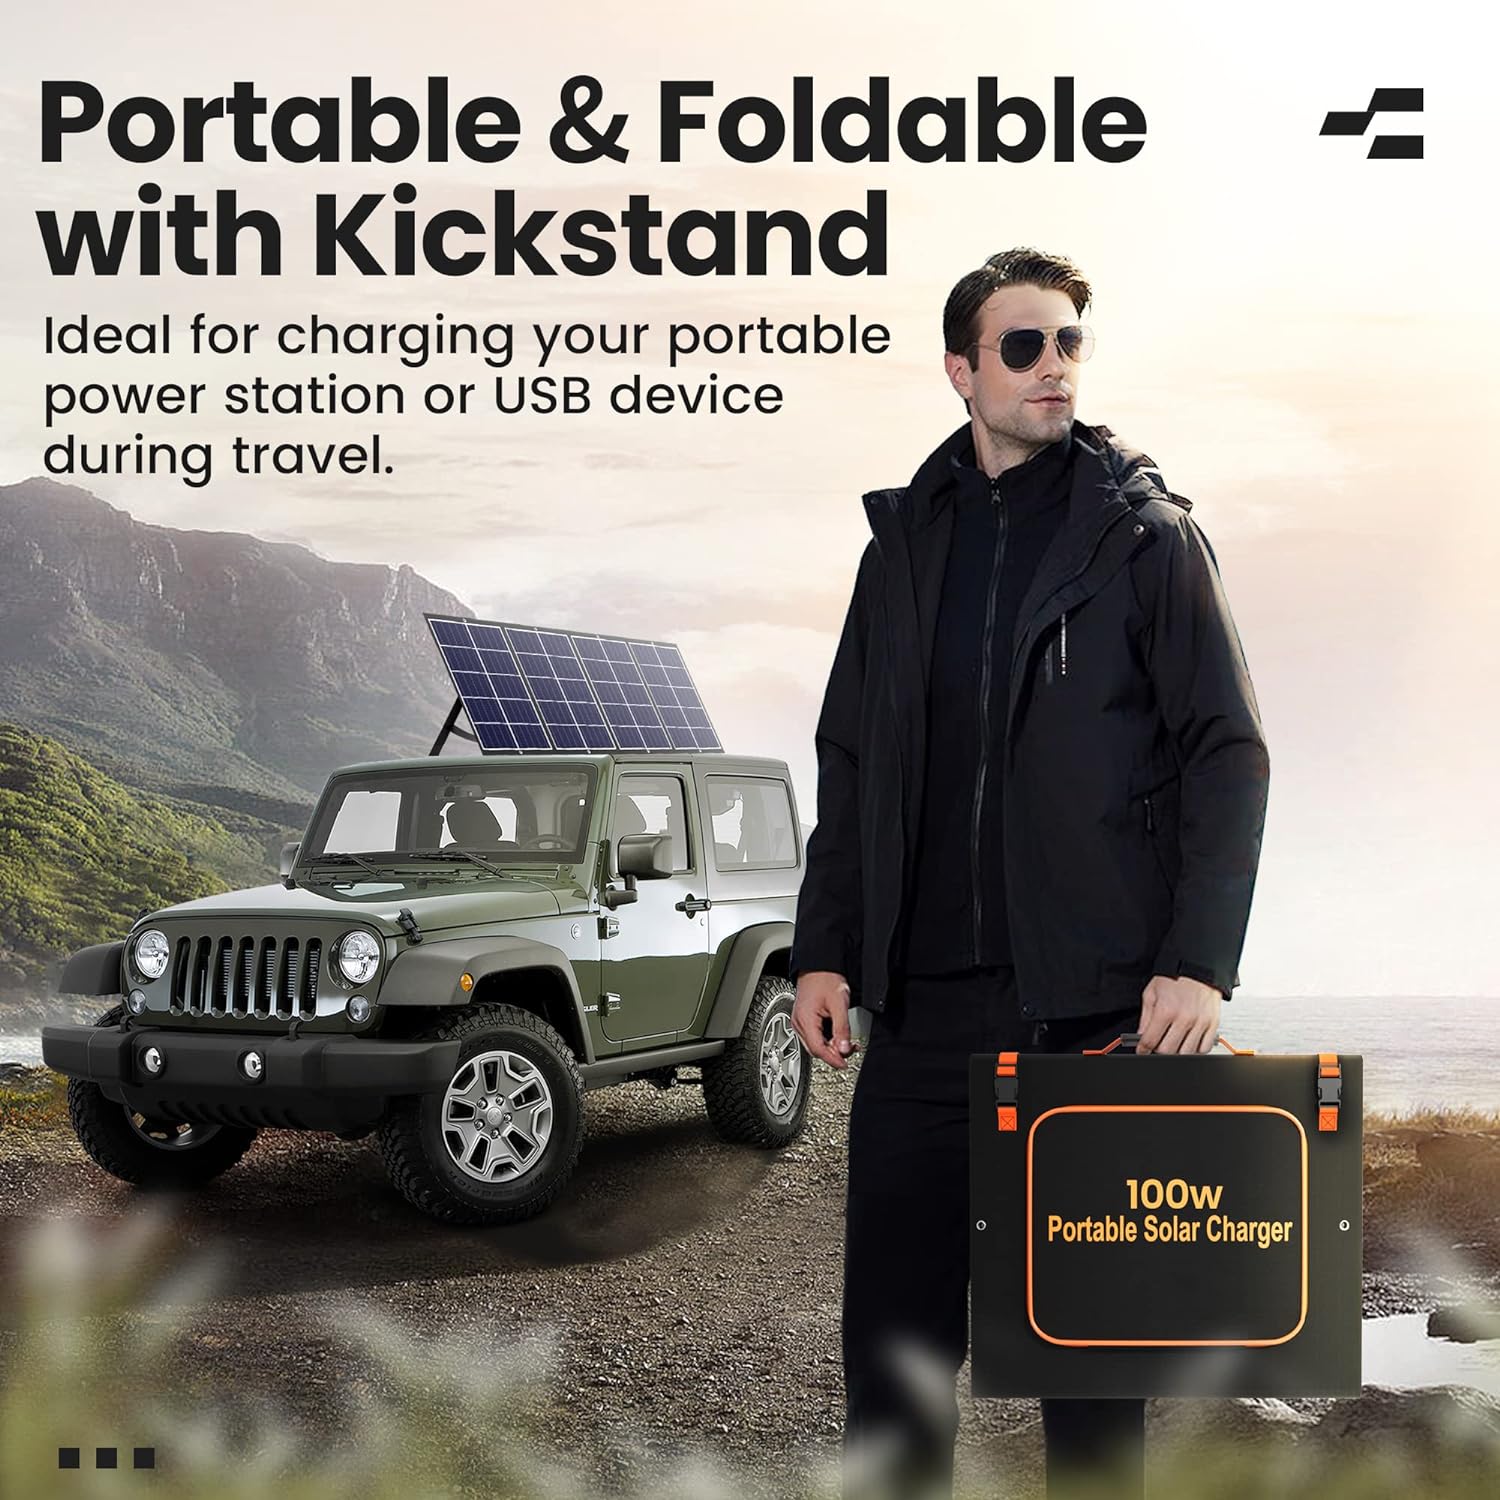 100W Portable Solar Panel Kit with Stand Foldable Solar Panel Charger for Jackery Power Station, 8mm Goal Zero Yeti Power Station, Suaoki Portable Generator, Phones, Laptop, with QC 3.0 USB DC Ports - 100W Portable Solar Panel Kit Review